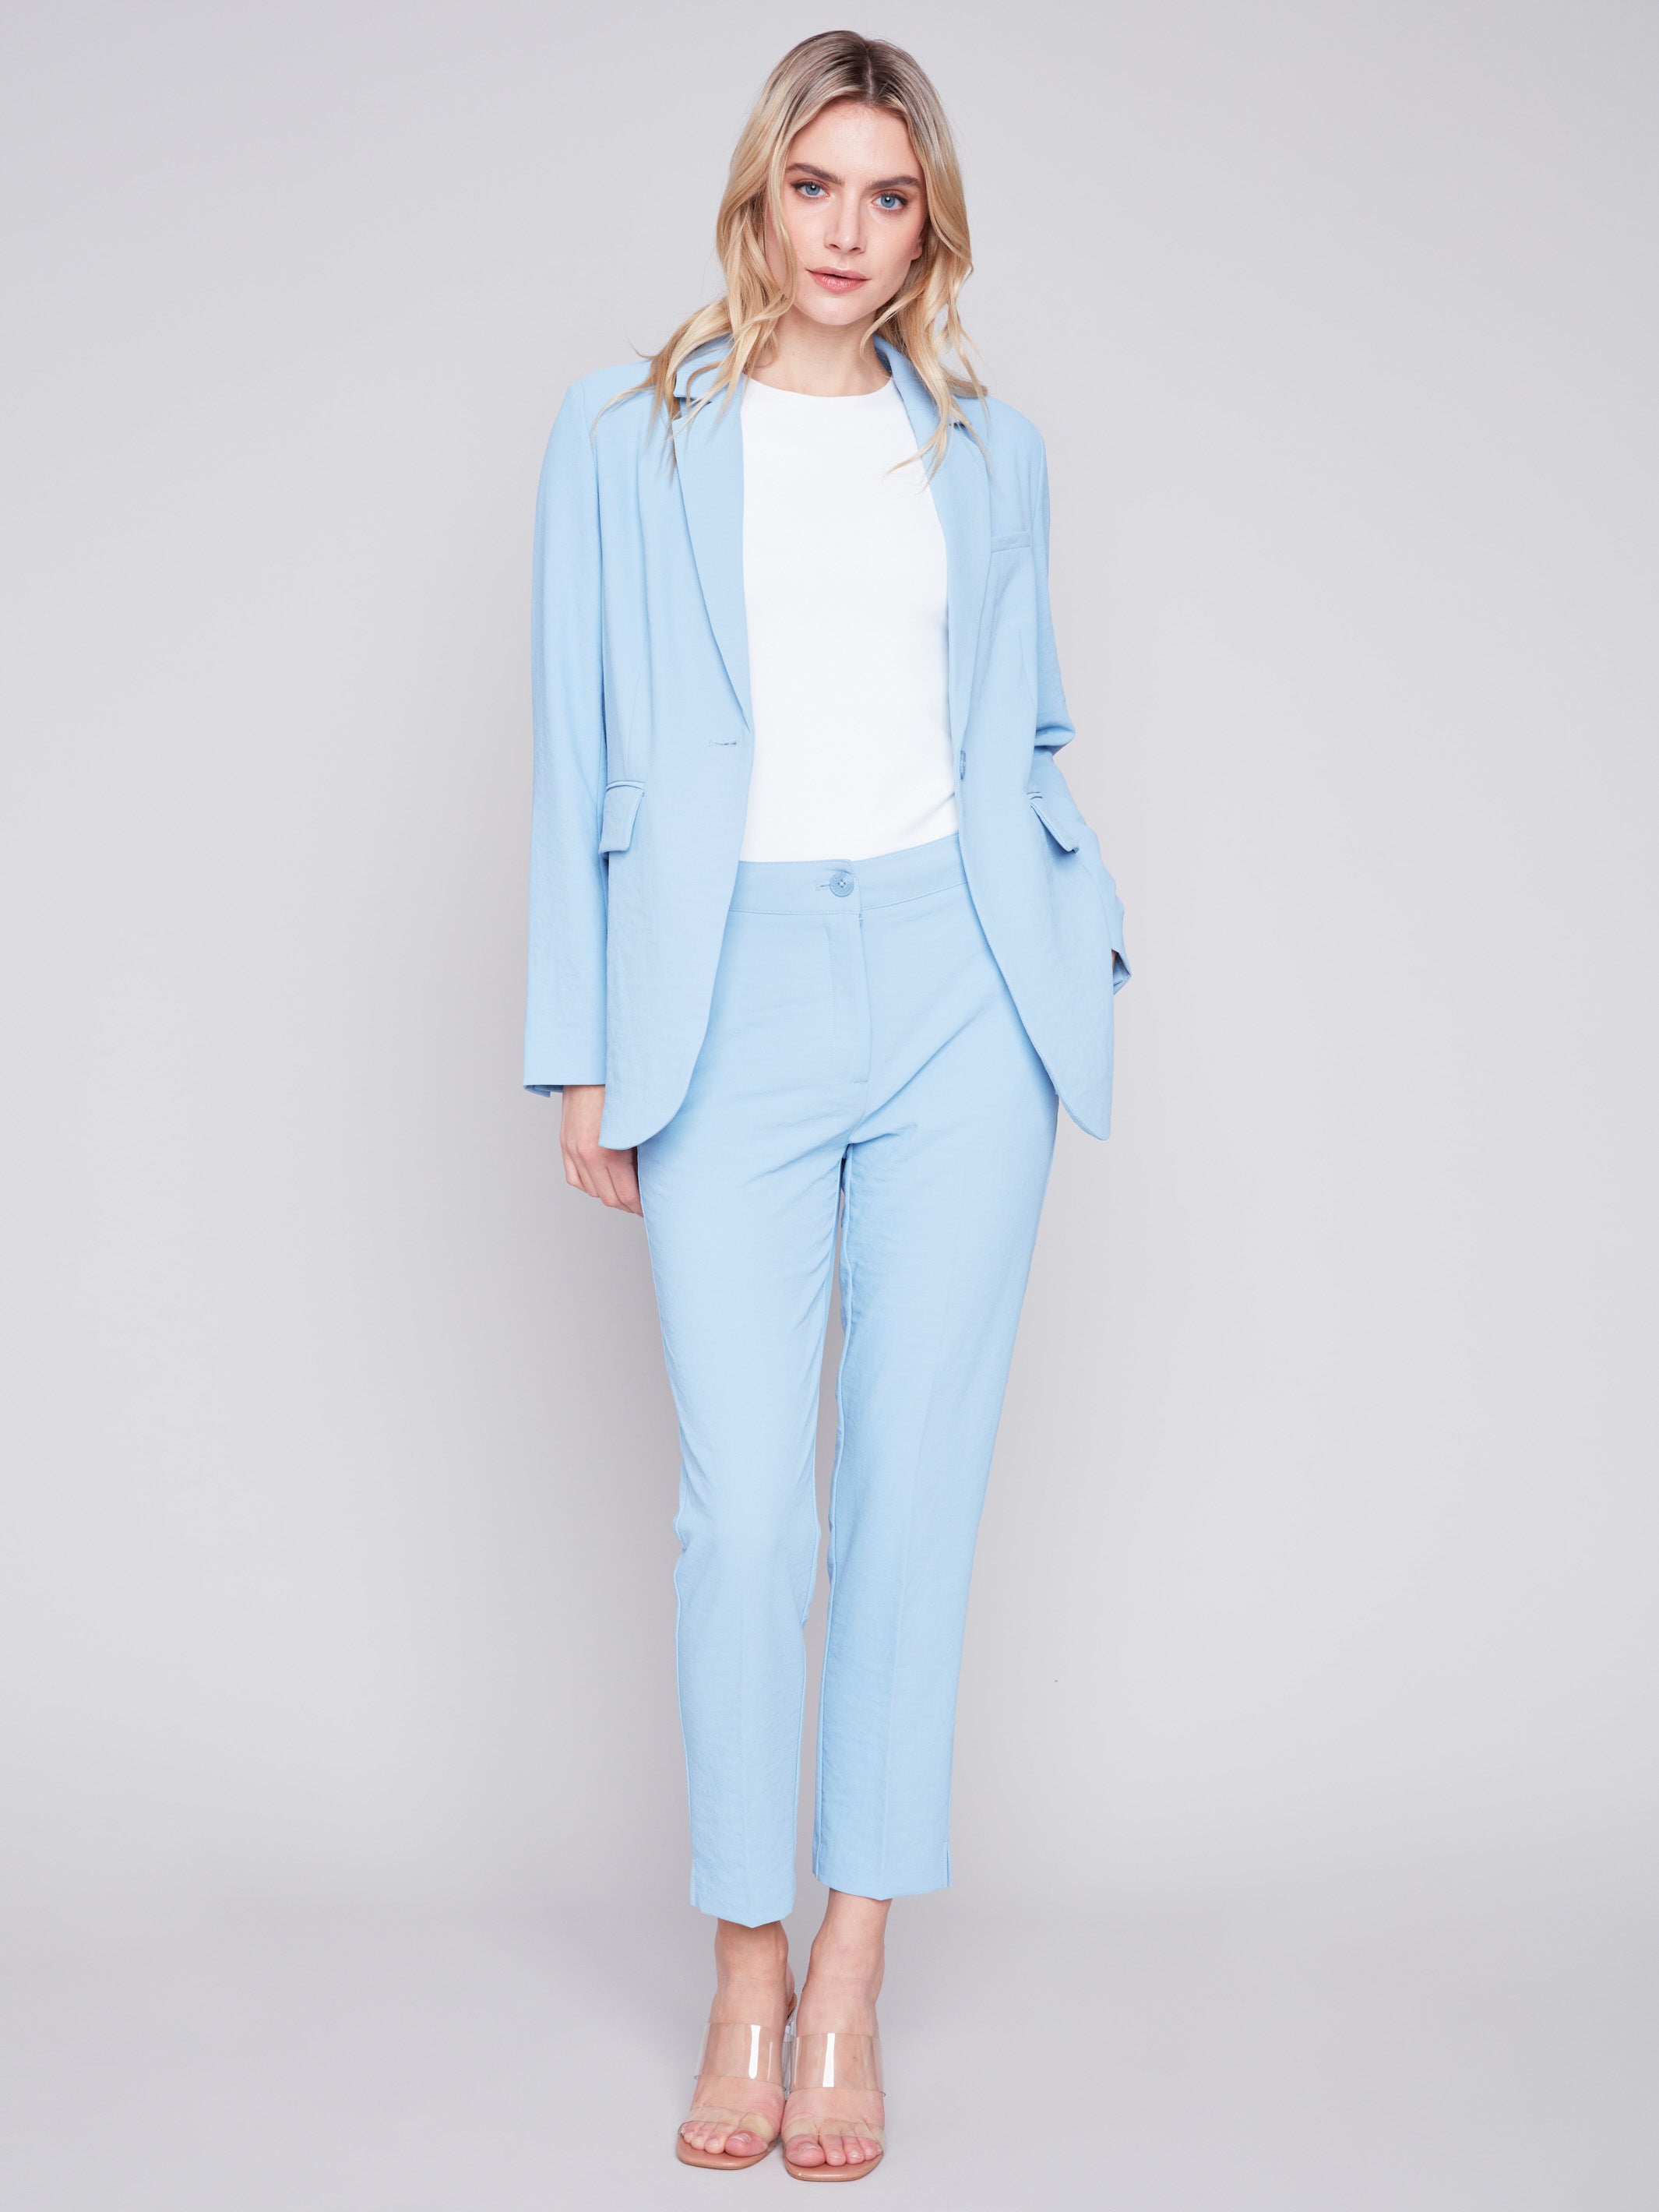 Pant Suit High Quality Sky Blue Womens Suits Woman Slim Double Breasted  Blazer Pencil Female Office WearWomens WomensWo From Cozycomfy21, $86.31 |  DHgate.Com